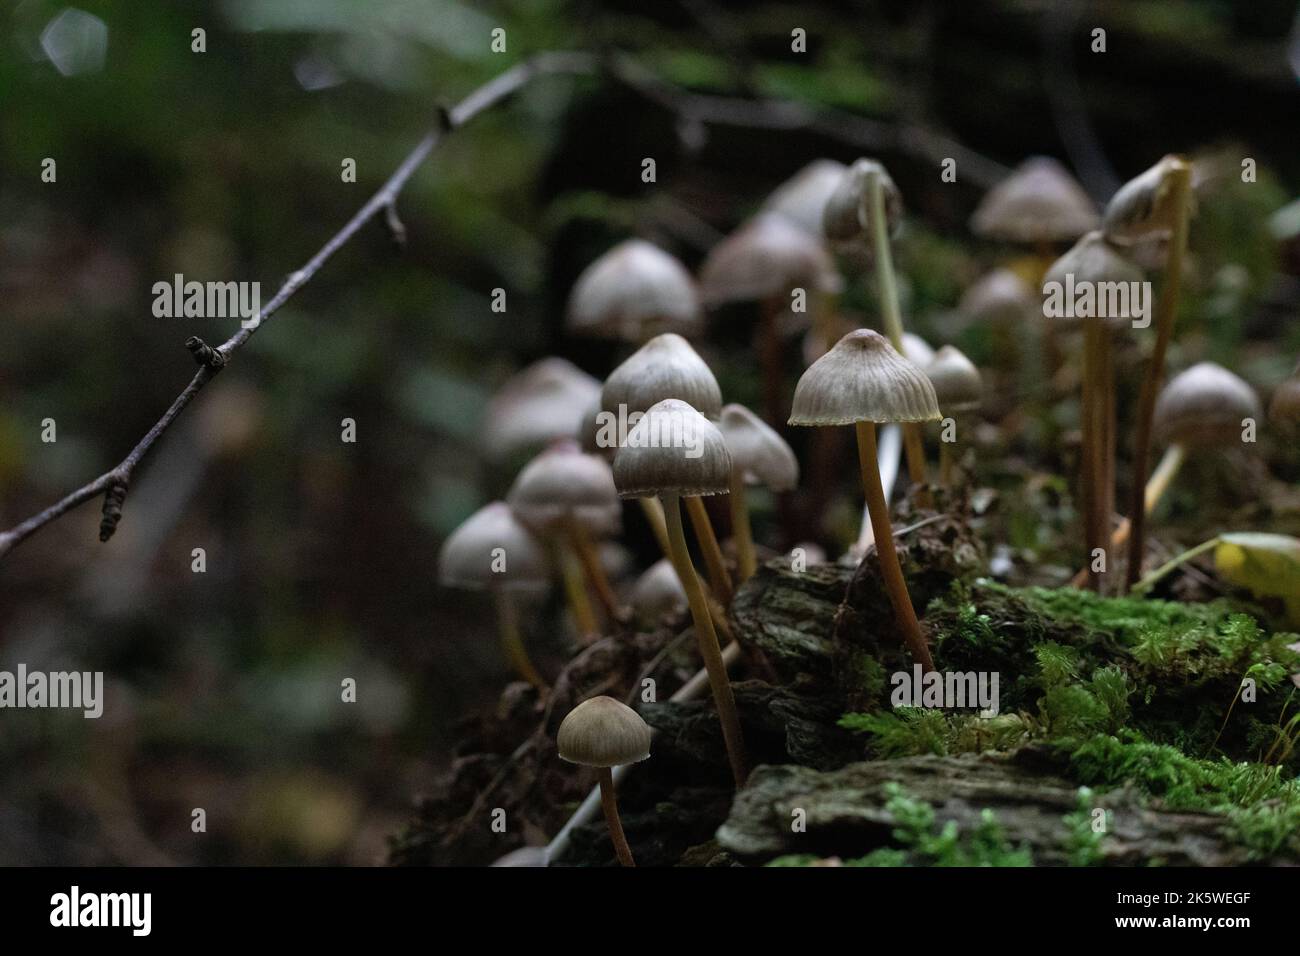 Mushrooms in woods on logs with green moss Stock Photo